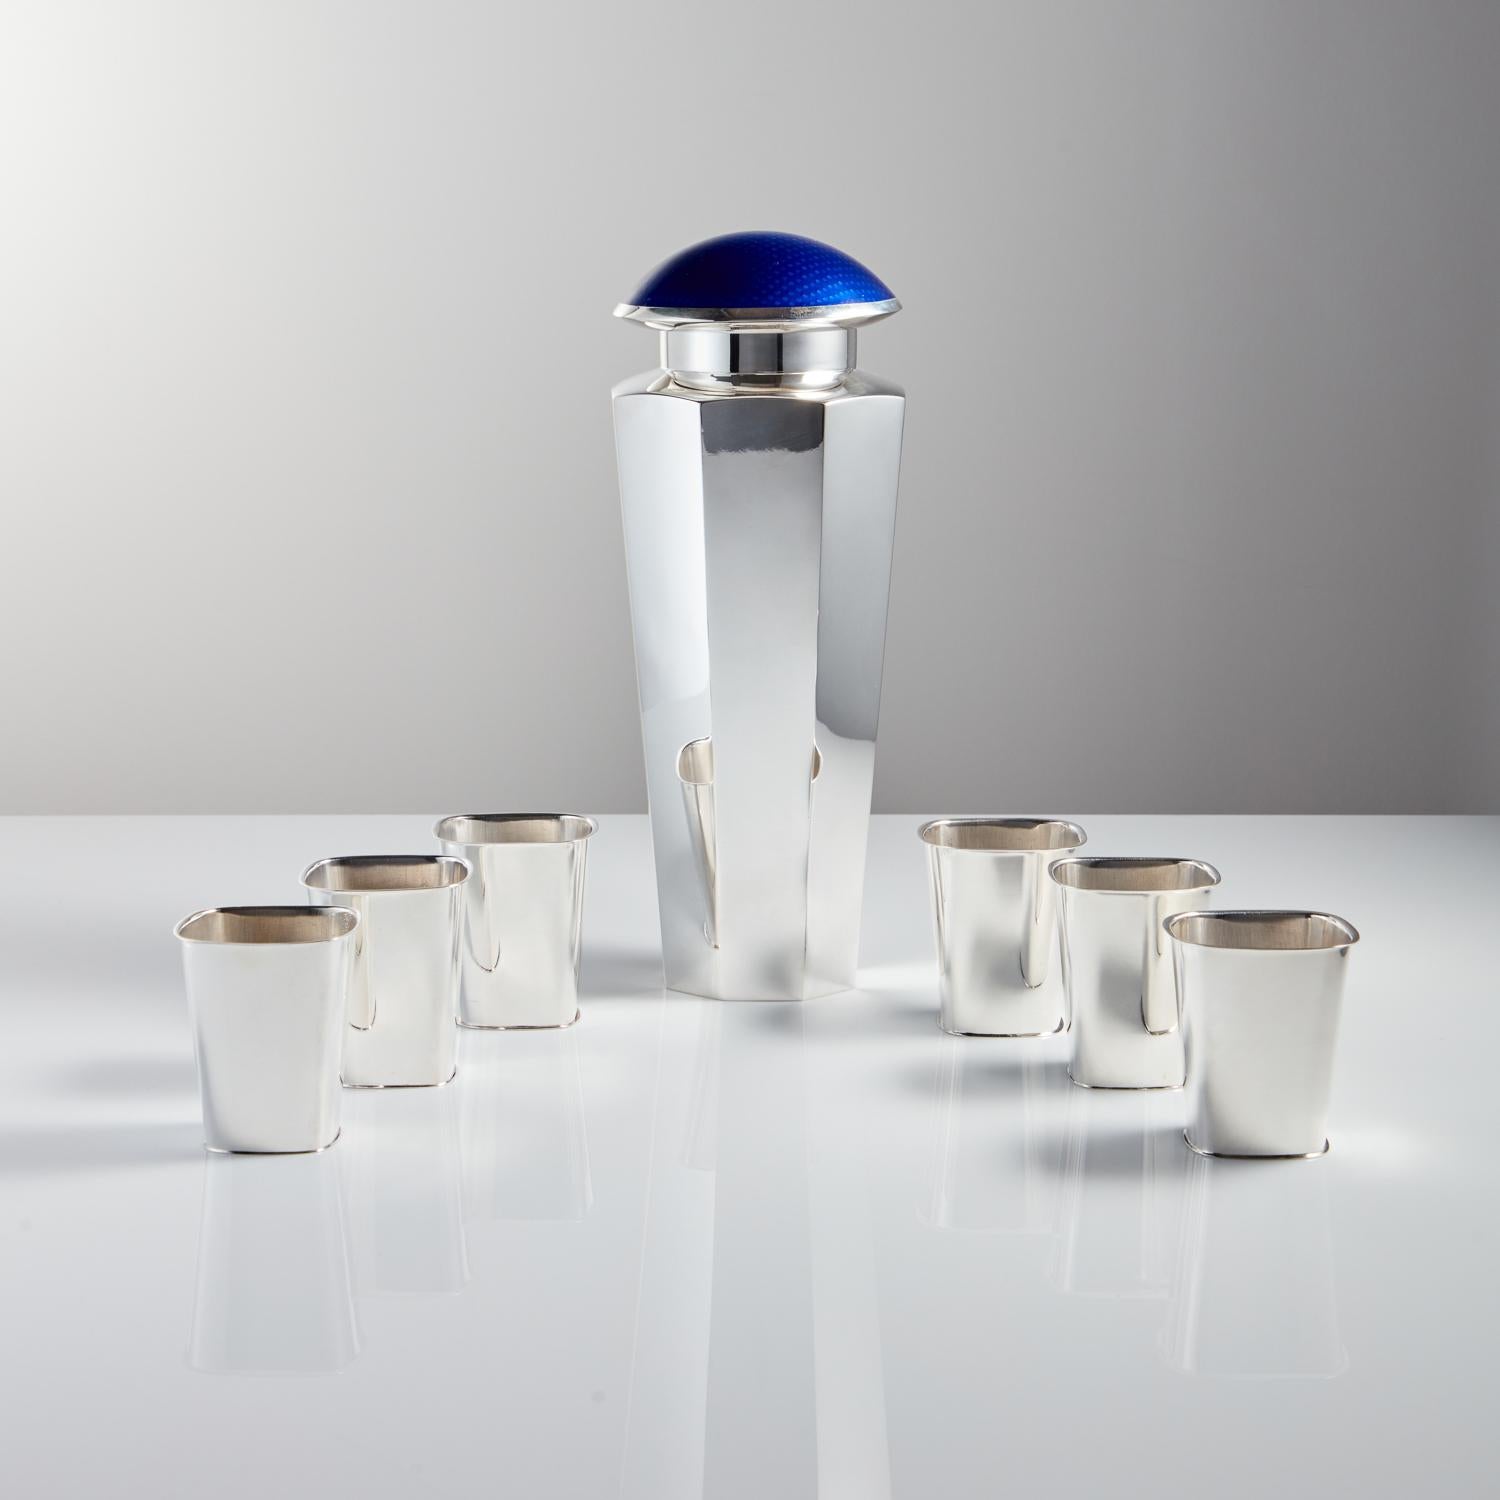 A rare mid-20th century Scandinavian sterling silver & enamel cocktail shaker Maker J Tostrup circa 1950-1955 with Shot cups by Gustaf Janson circa 1950.

The cocktail shaker base has a slender segmented body with marks for J Tostrop and the